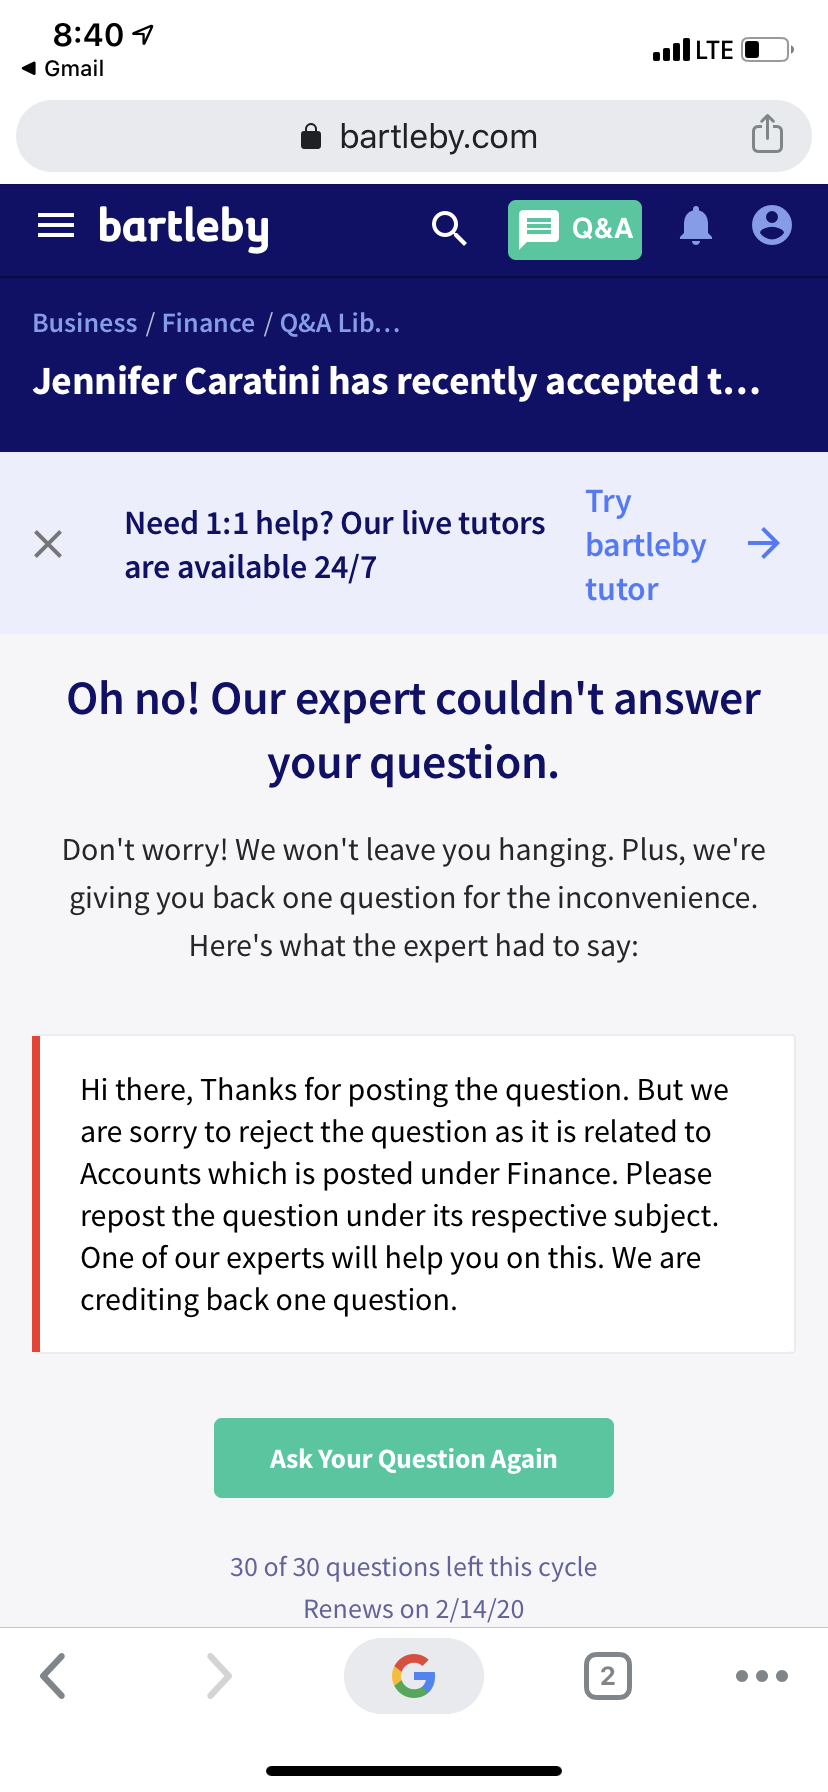 8:40 1
ll LTE O
1 Gmail
bartleby.com
= bartleby
Q&A
Business / Finance / Q&A Lib...
Jennifer Caratini has recently accepted t...
Try
Need 1:1 help? Our live tutors
are available 24/7
bartleby >
tutor
Oh no! Our expert couldn't answer
your question.
Don't worry! We won't leave you hanging. Plus, we're
giving you back one question for the inconvenience.
Here's what the expert had to say:
Hi there, Thanks for posting the question. But we
are sorry to reject the question as it is related to
Accounts which is posted under Finance. Please
repost the question under its respective subject.
One of our experts will help you on this. We are
crediting back one question.
Ask Your Question Again
30 of 30 questions left this cycle
Renews on 2/14/20
